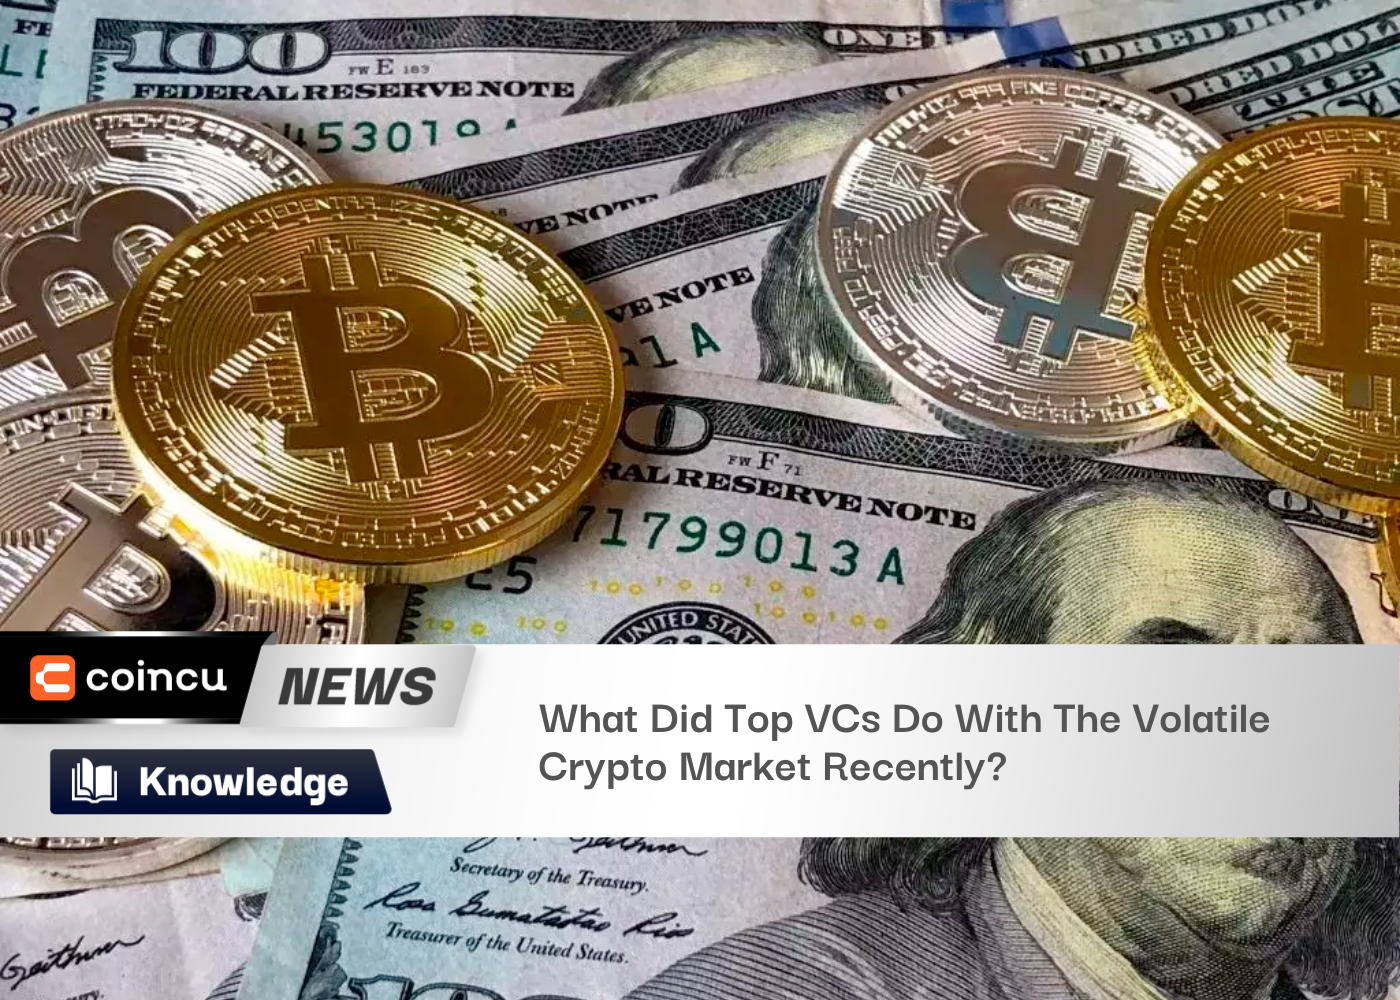 What Did Top VCs Do With The Volatile Crypto Market Recently?